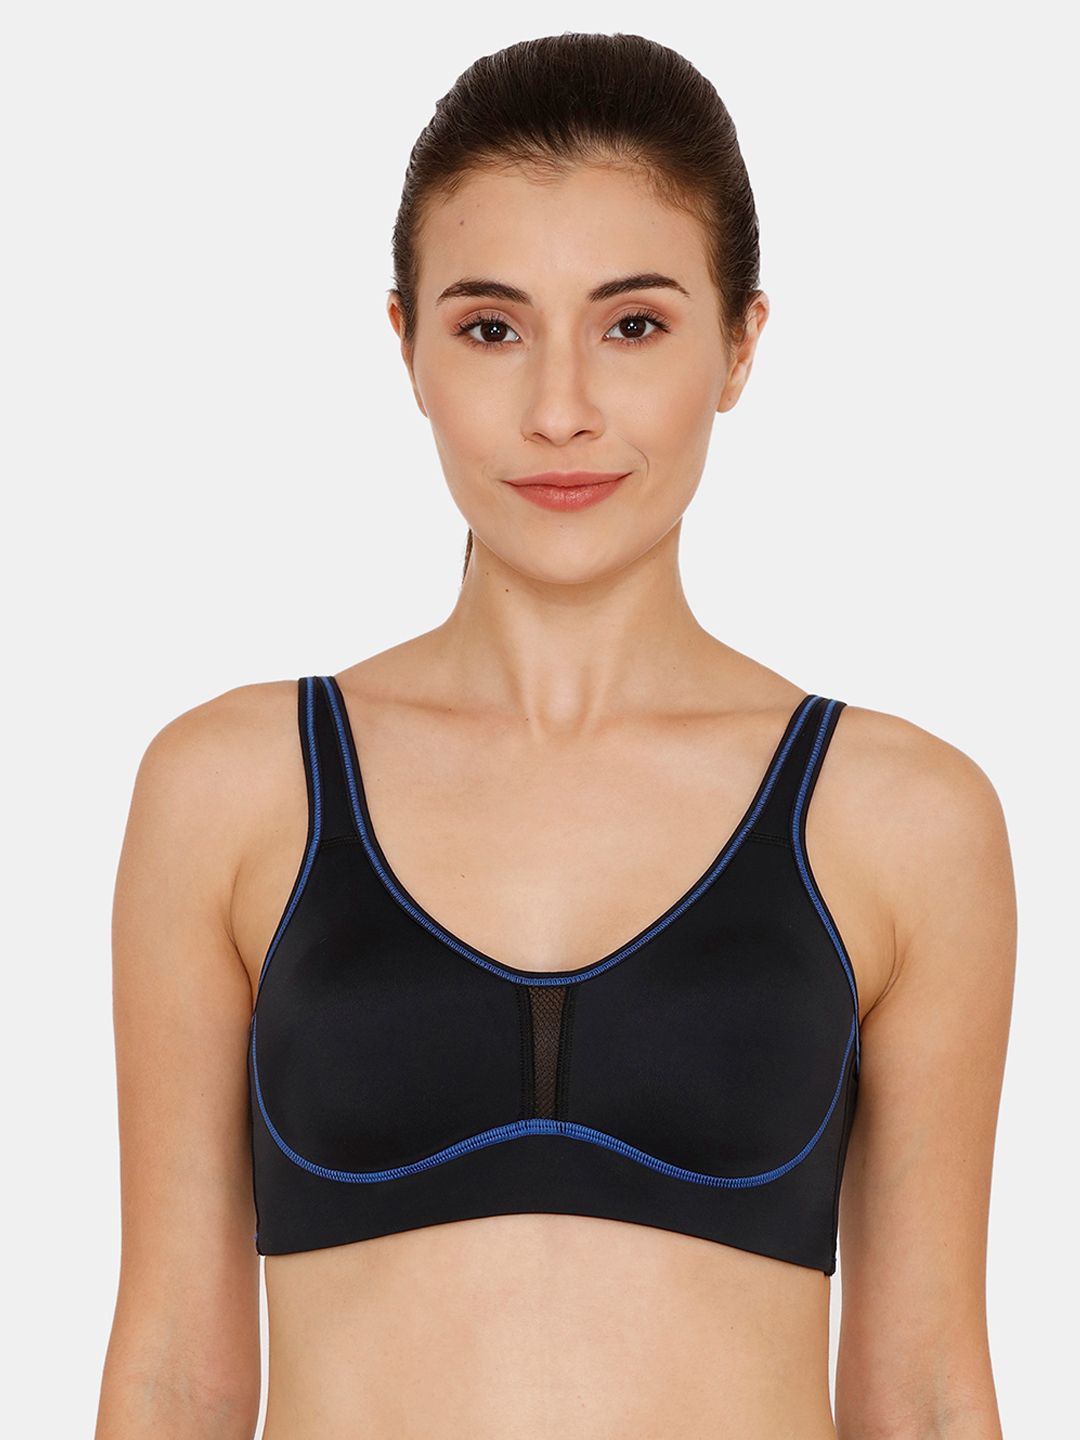 Zelocity by Zivame Black Solid Non-Wired Non Padded Sports Bra ZC4526CORE0BLAK Price in India